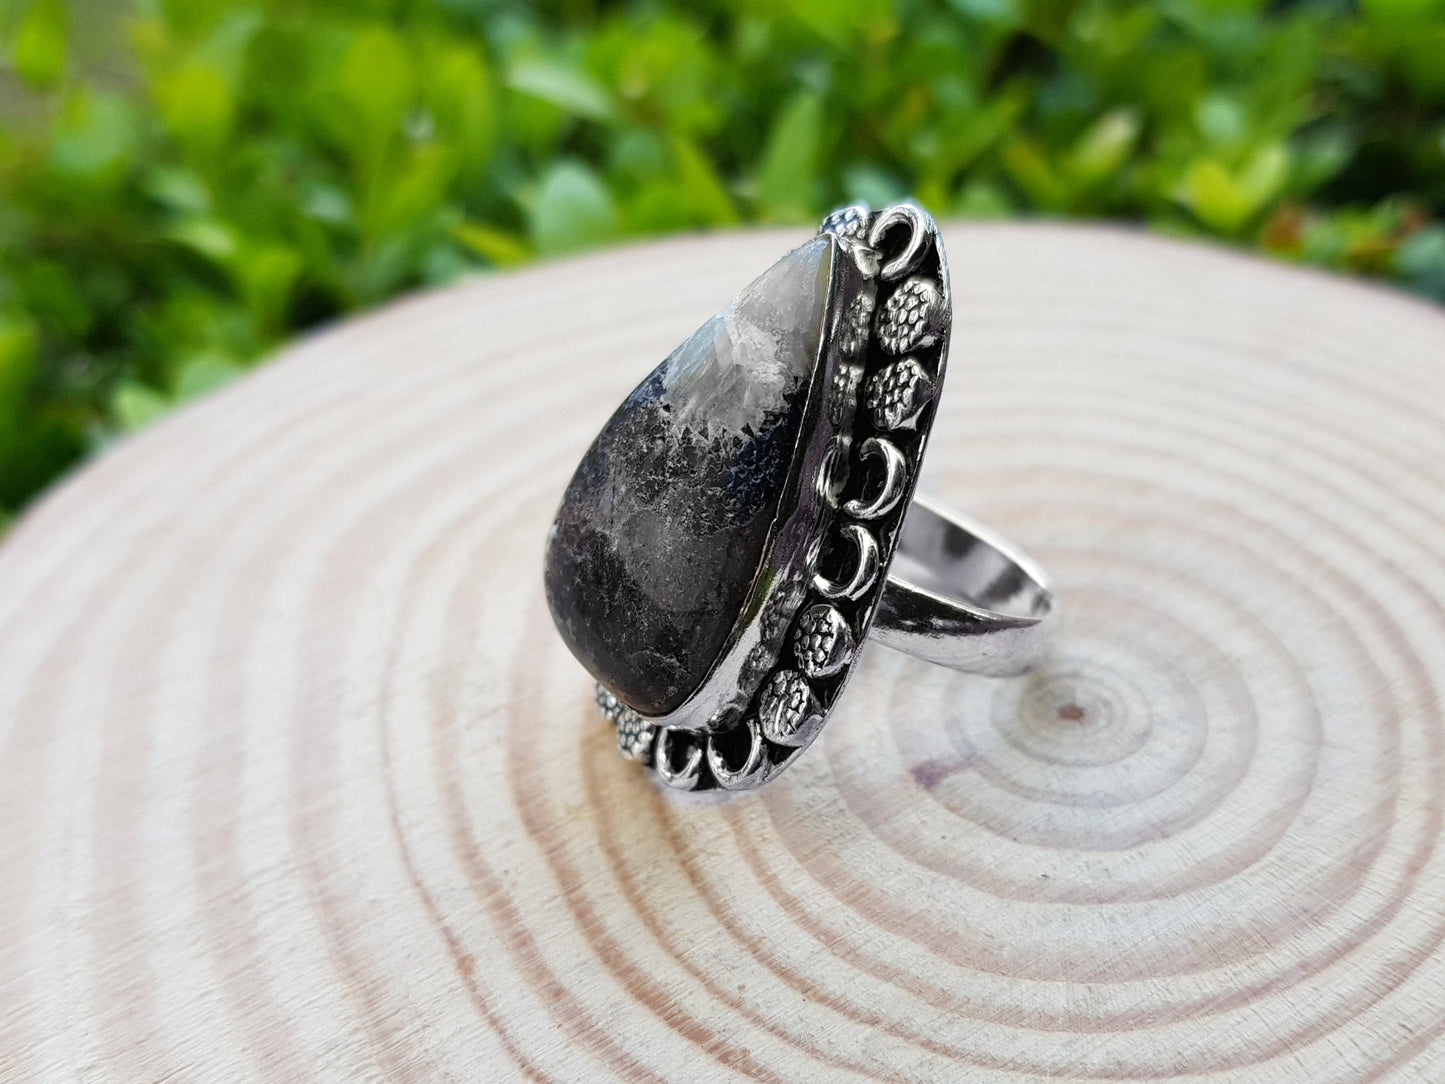 Raw Septarian Jasper Ring In Sterling Silver Size US 7 Boho Rings GypsyJewellery One Of A Kind Gift